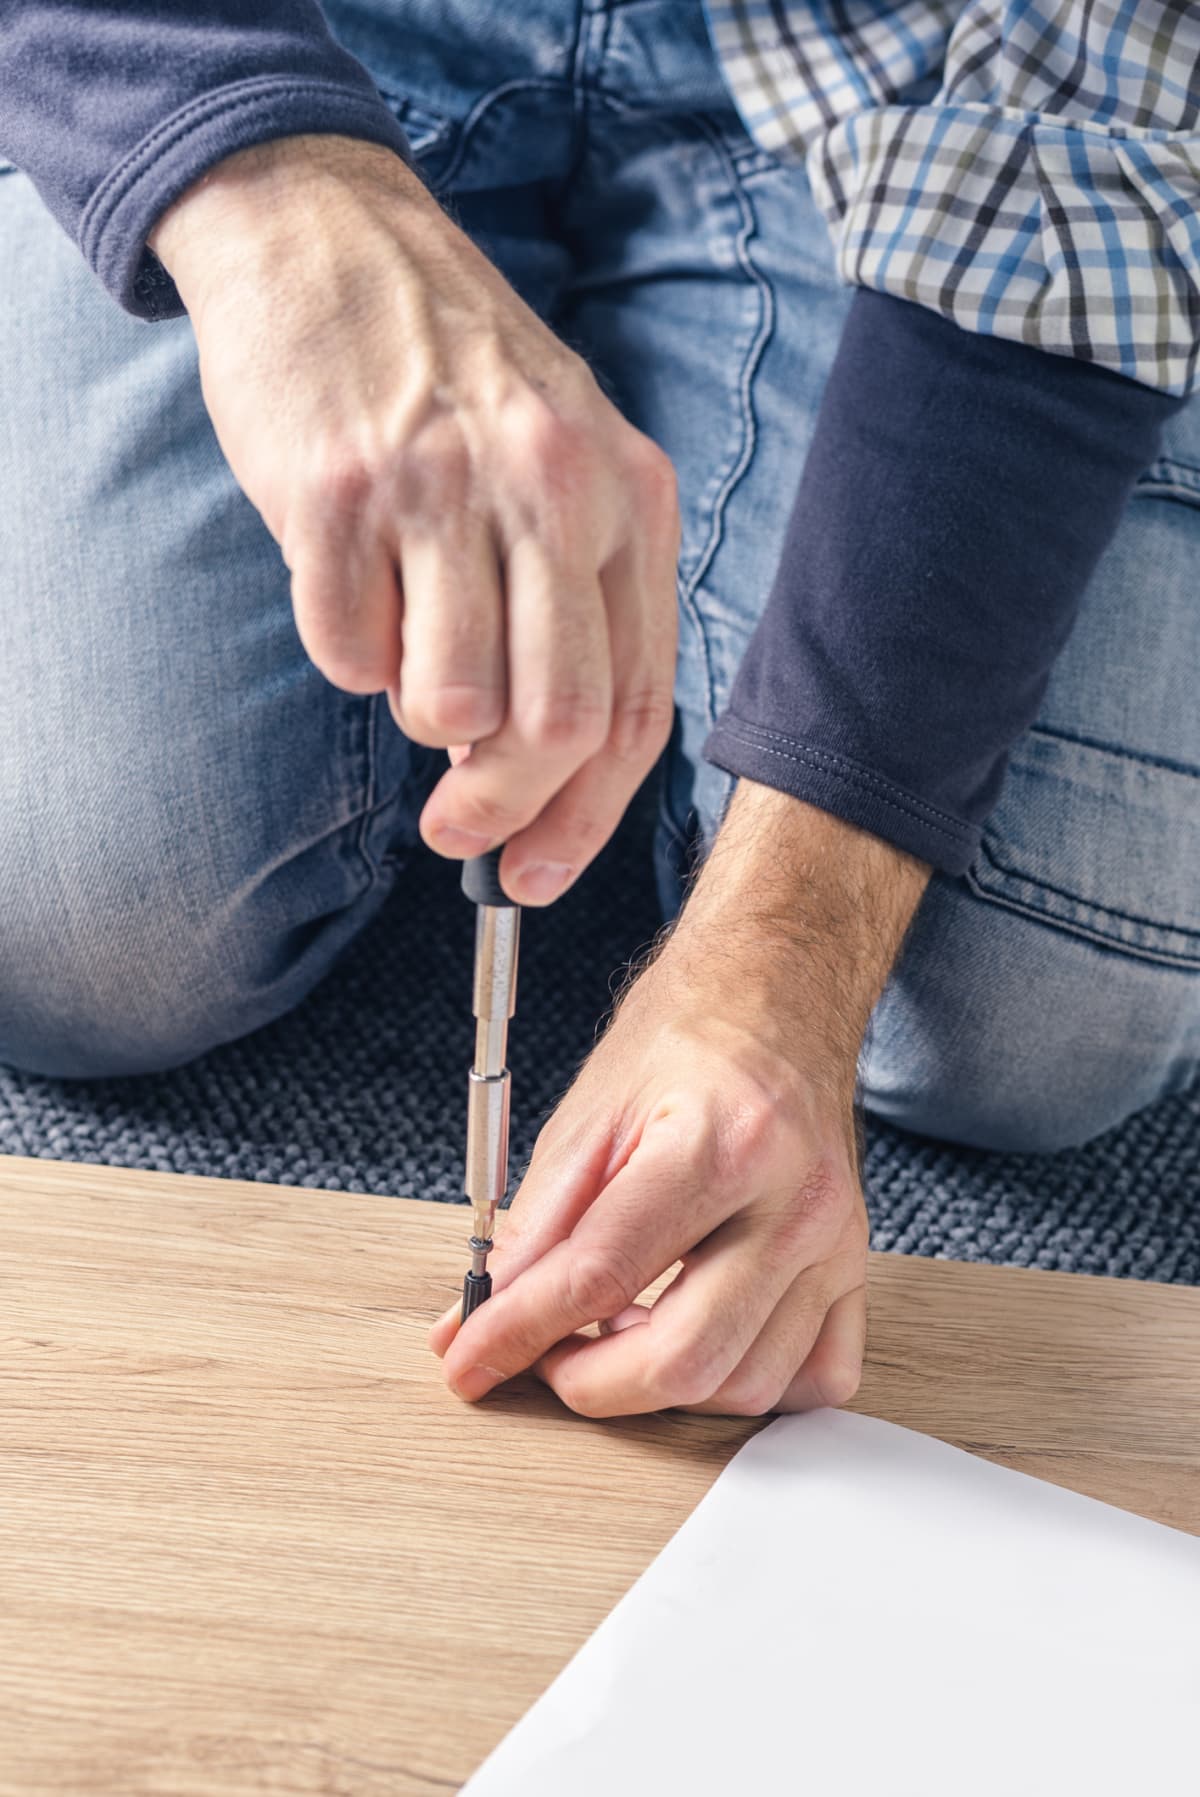 Man assembling furniture at home on the floor, hand with screwdriver